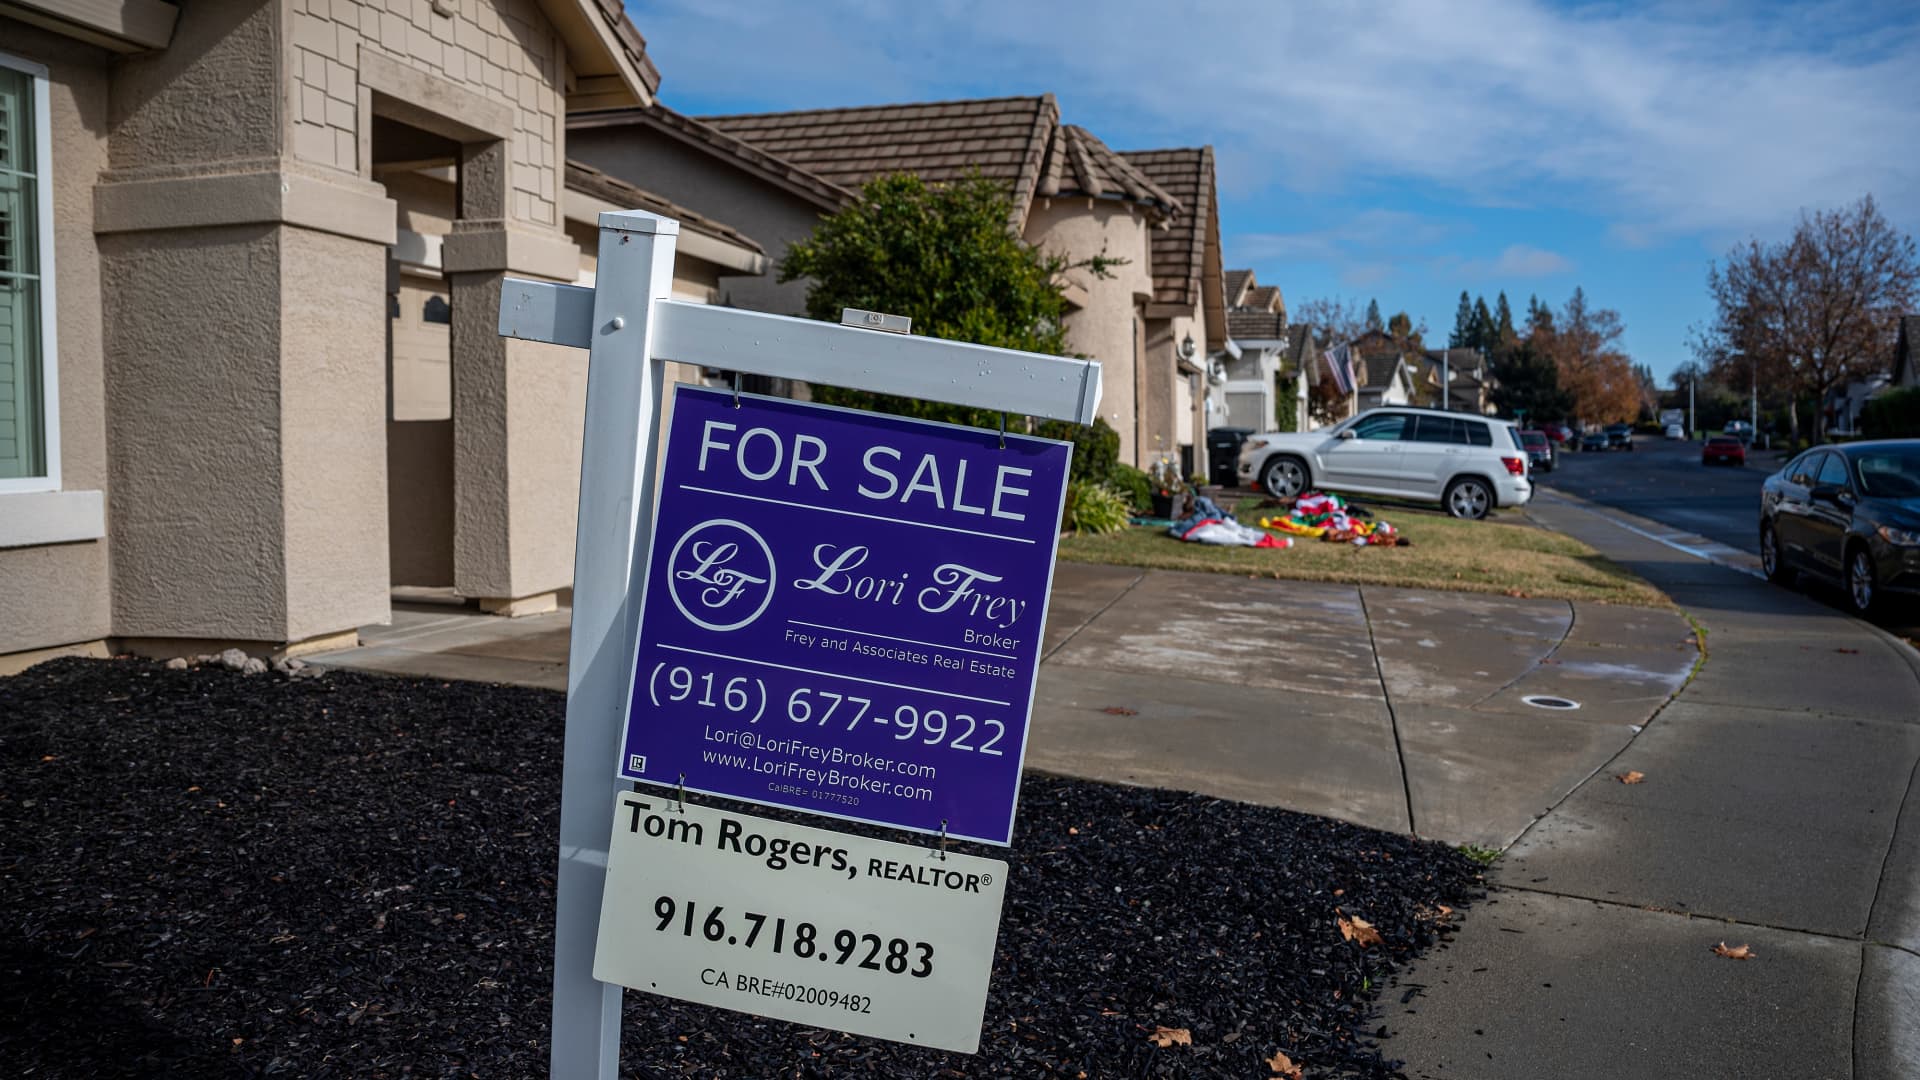 Home price gains weakened sharply to end 2022: S&P Case-Shiller